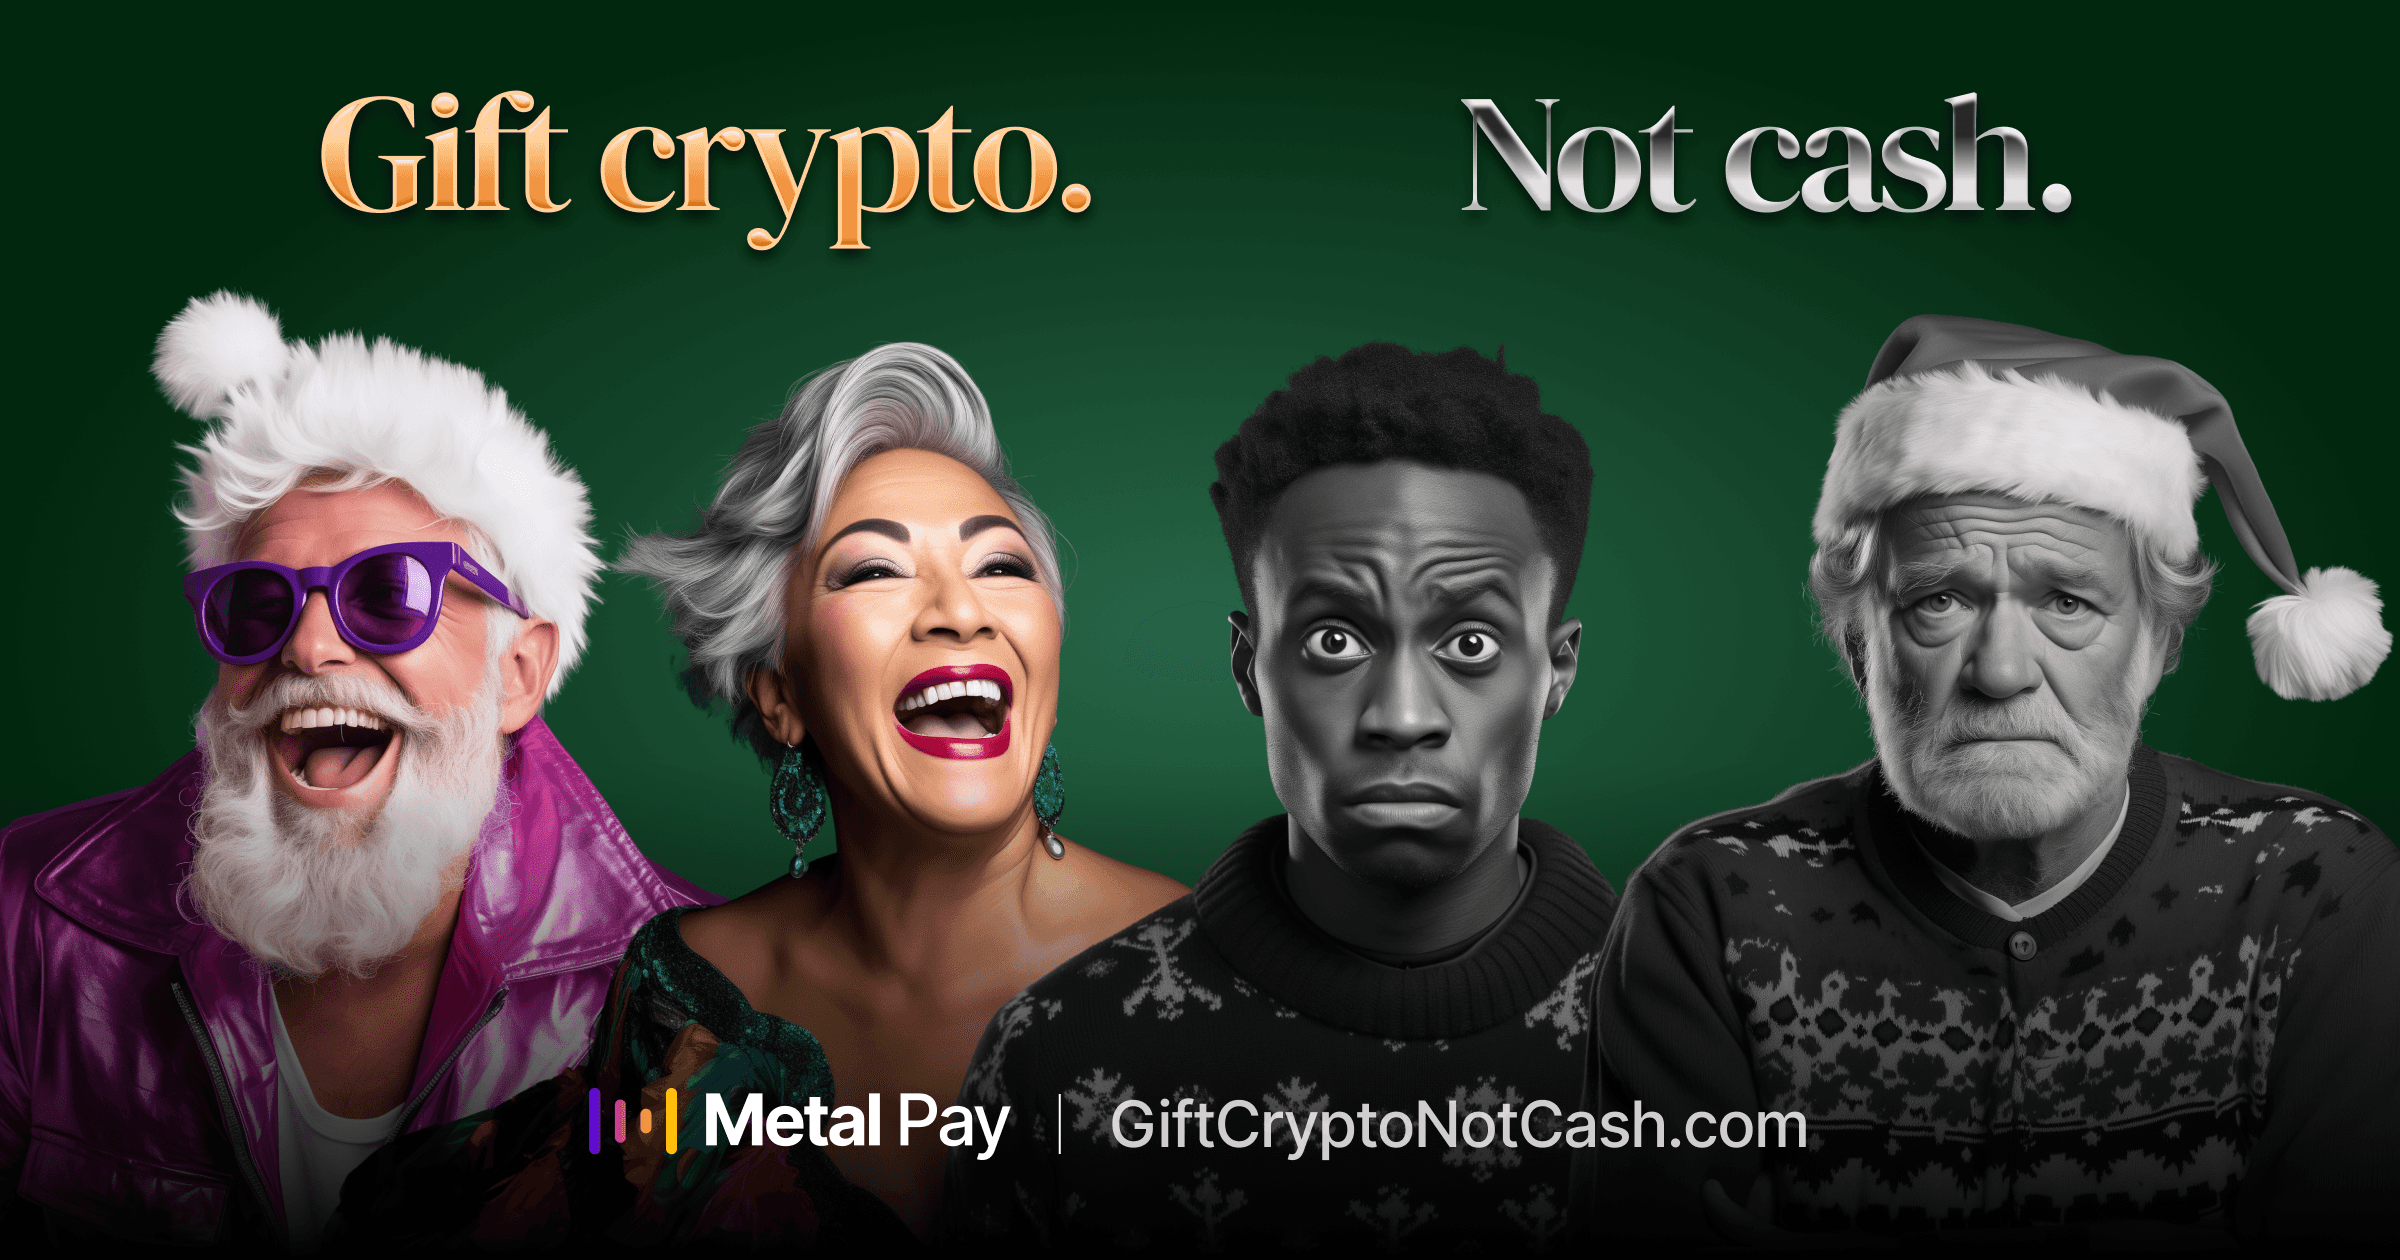 Gift Crypto Not Cash by Metal Pay